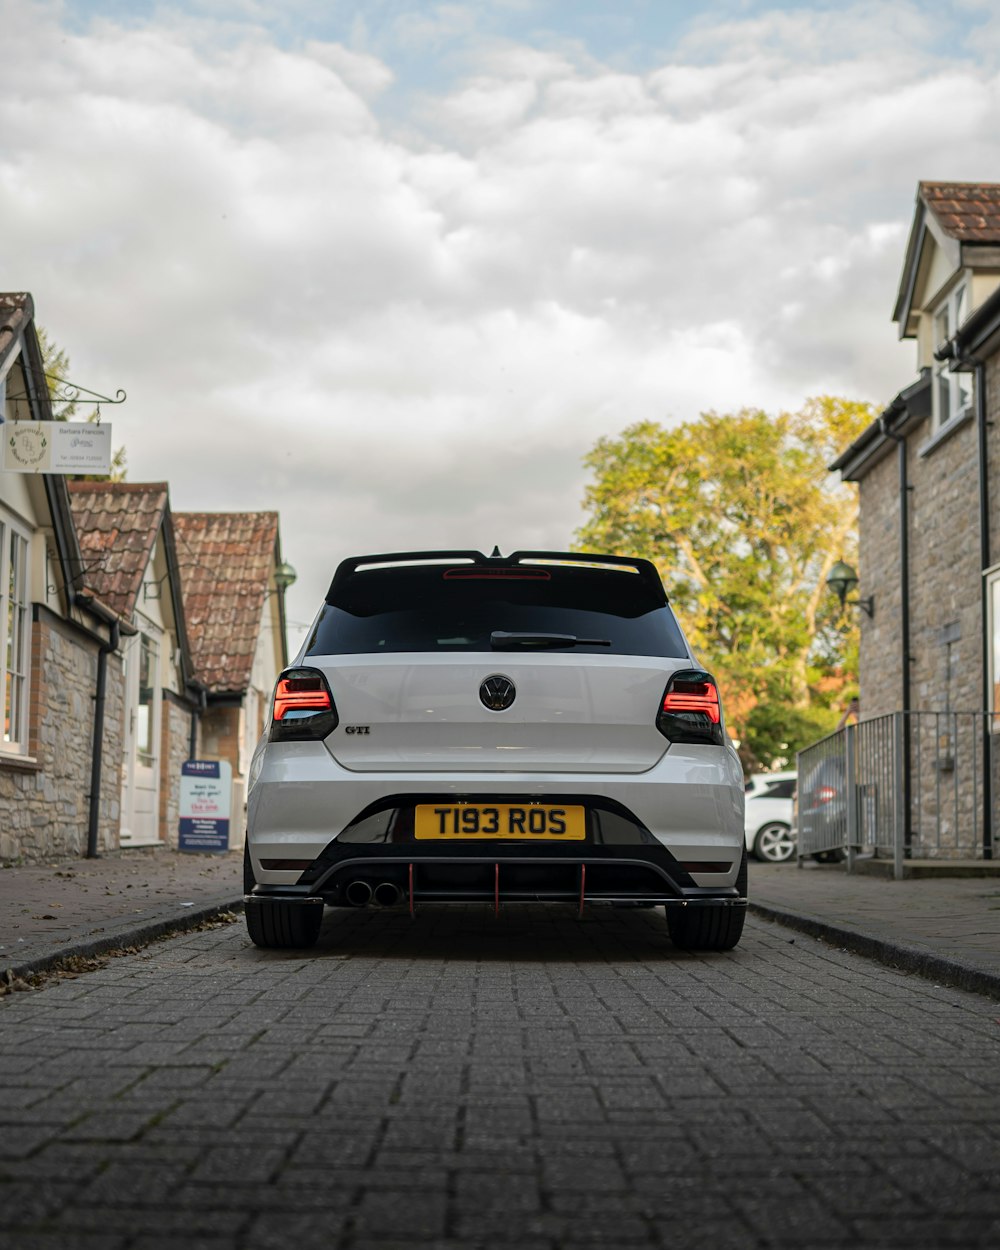 Polo Gti Pictures | Download Free Images on Unsplash